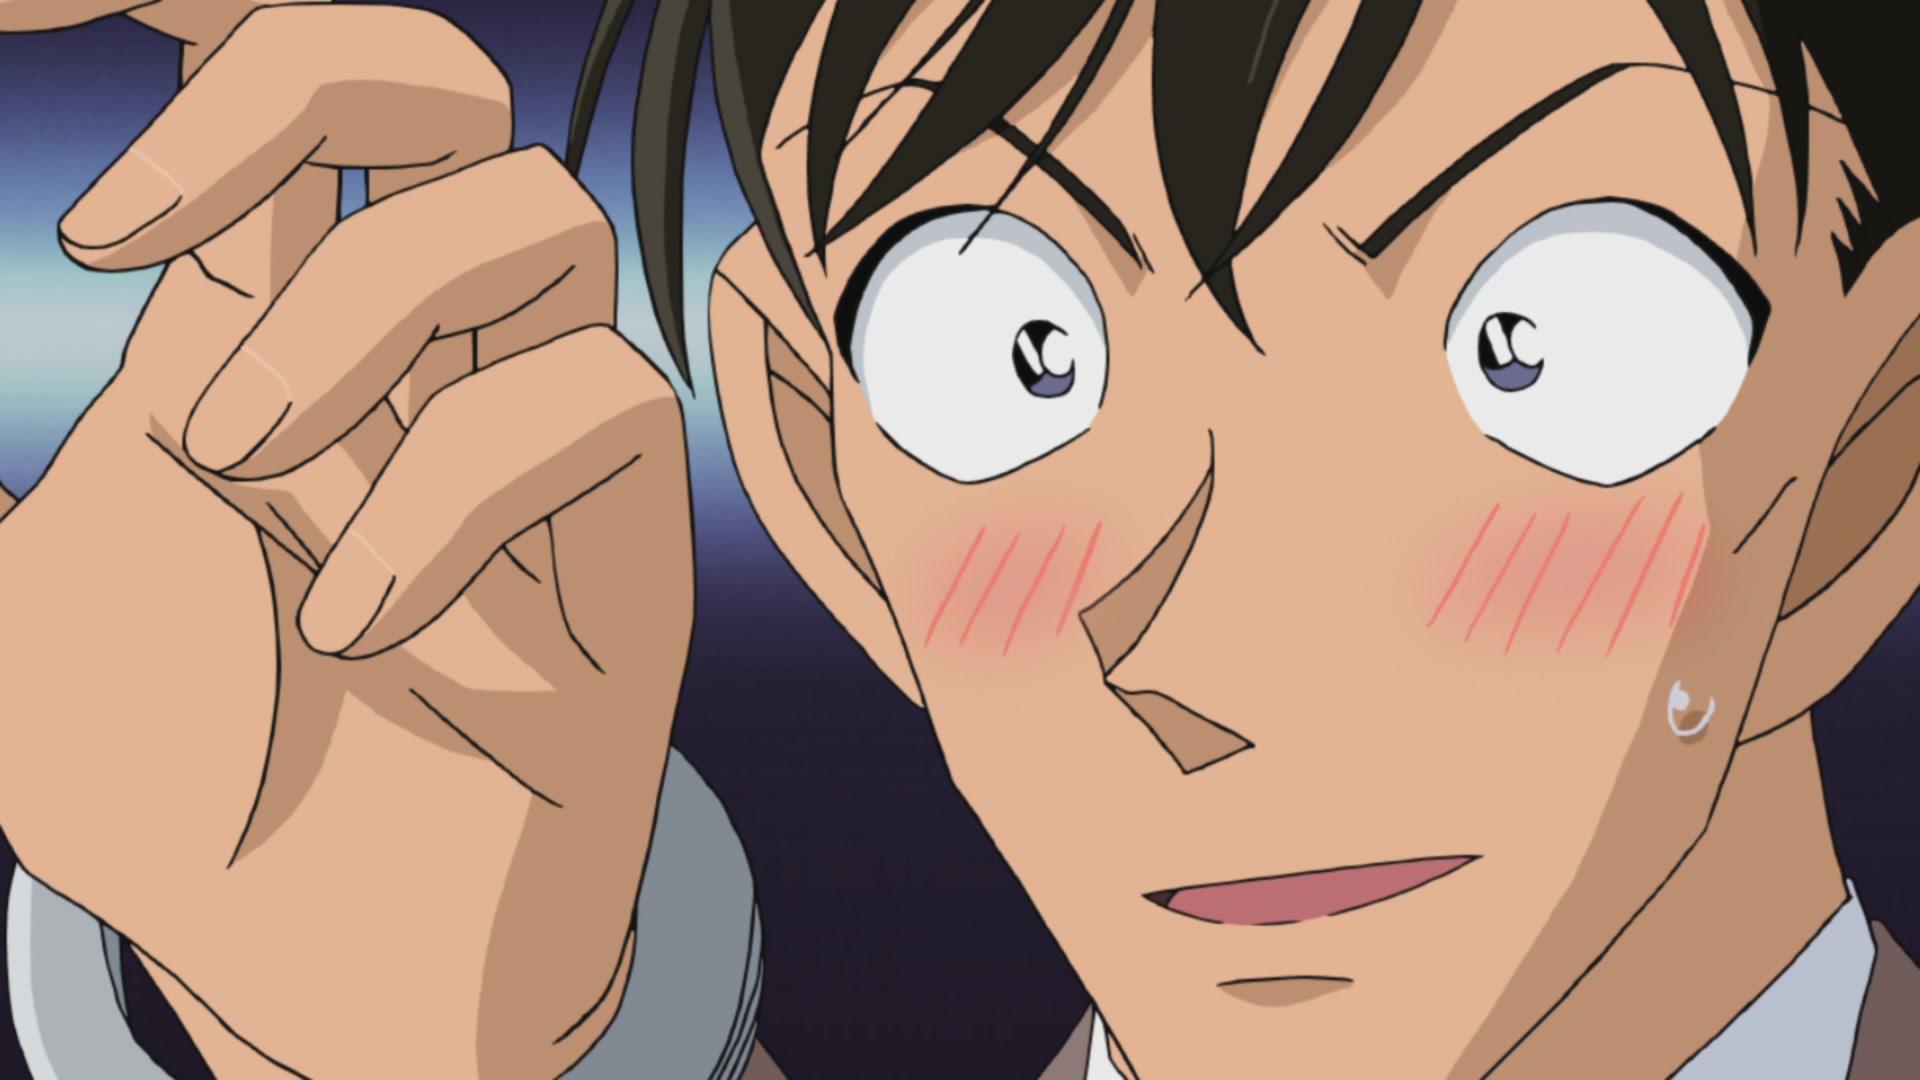 Case Closed Detective Conan Episode 791 Detective Takagi On The Run In Handcuffs Watch On Crunchyroll